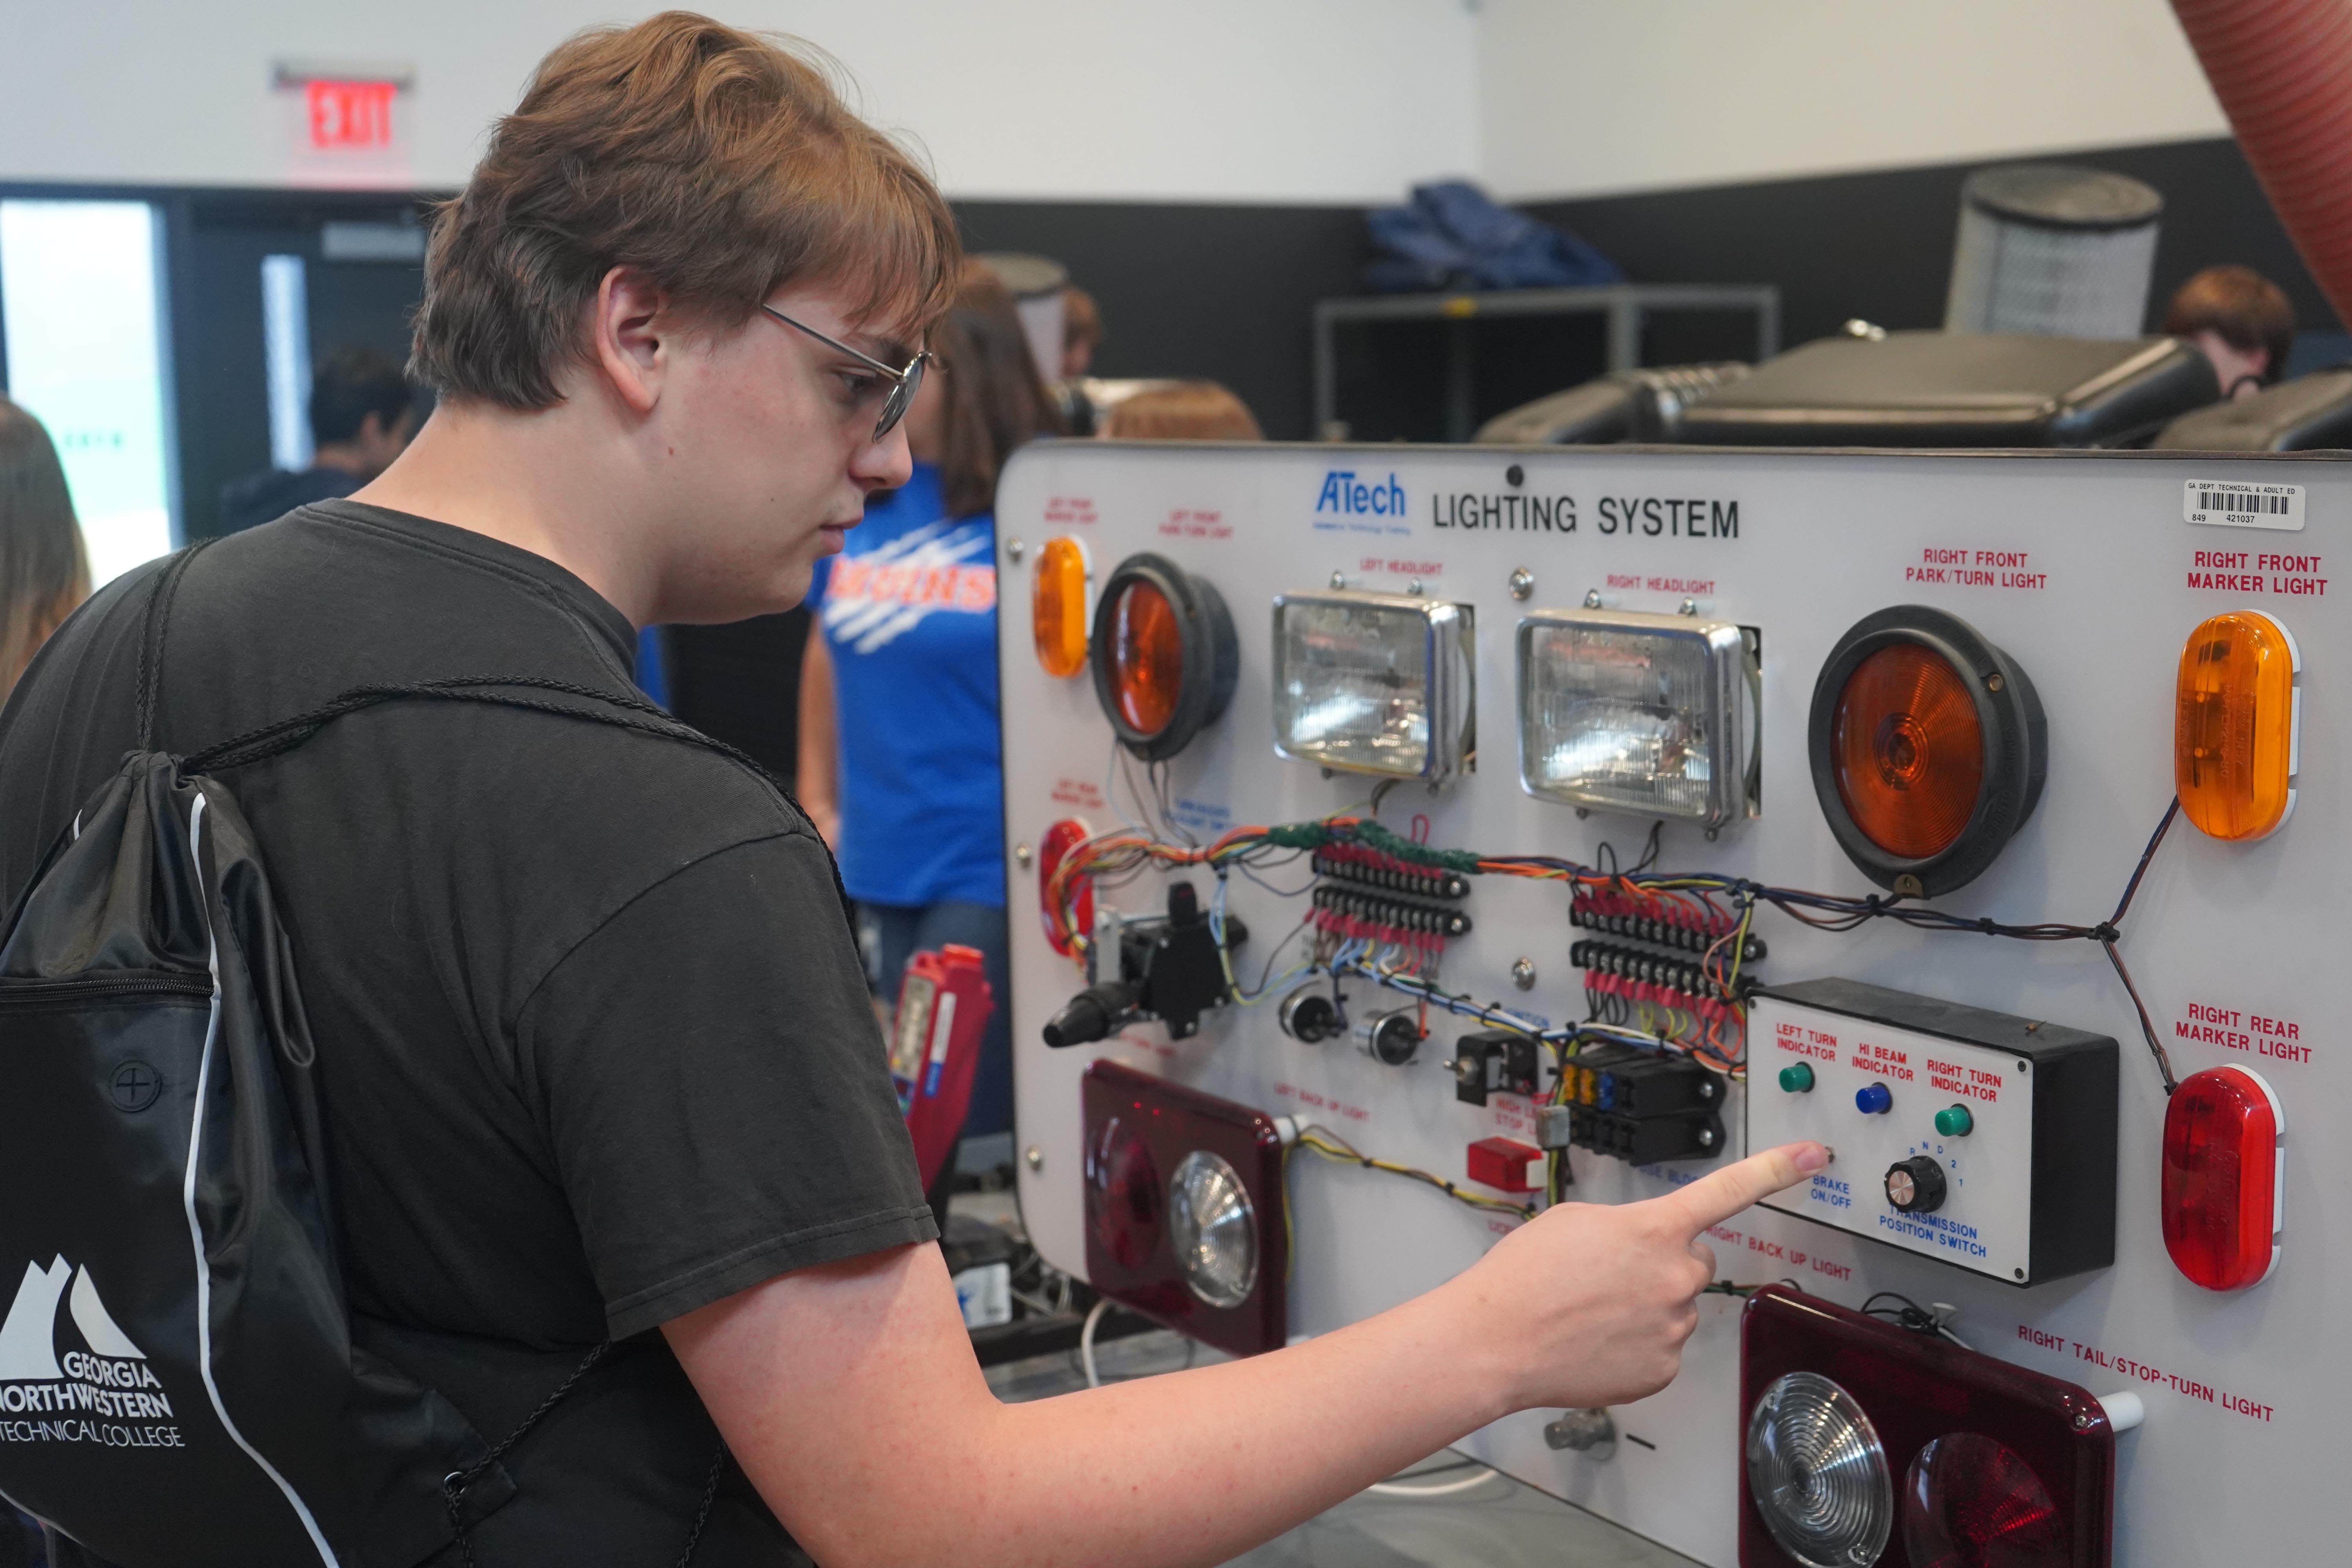 Turner Jenkins of Northwest Whitfield High School examines the lighting system in the Diesel Equipment Technology lab during Industrial Career Day at GNTC.